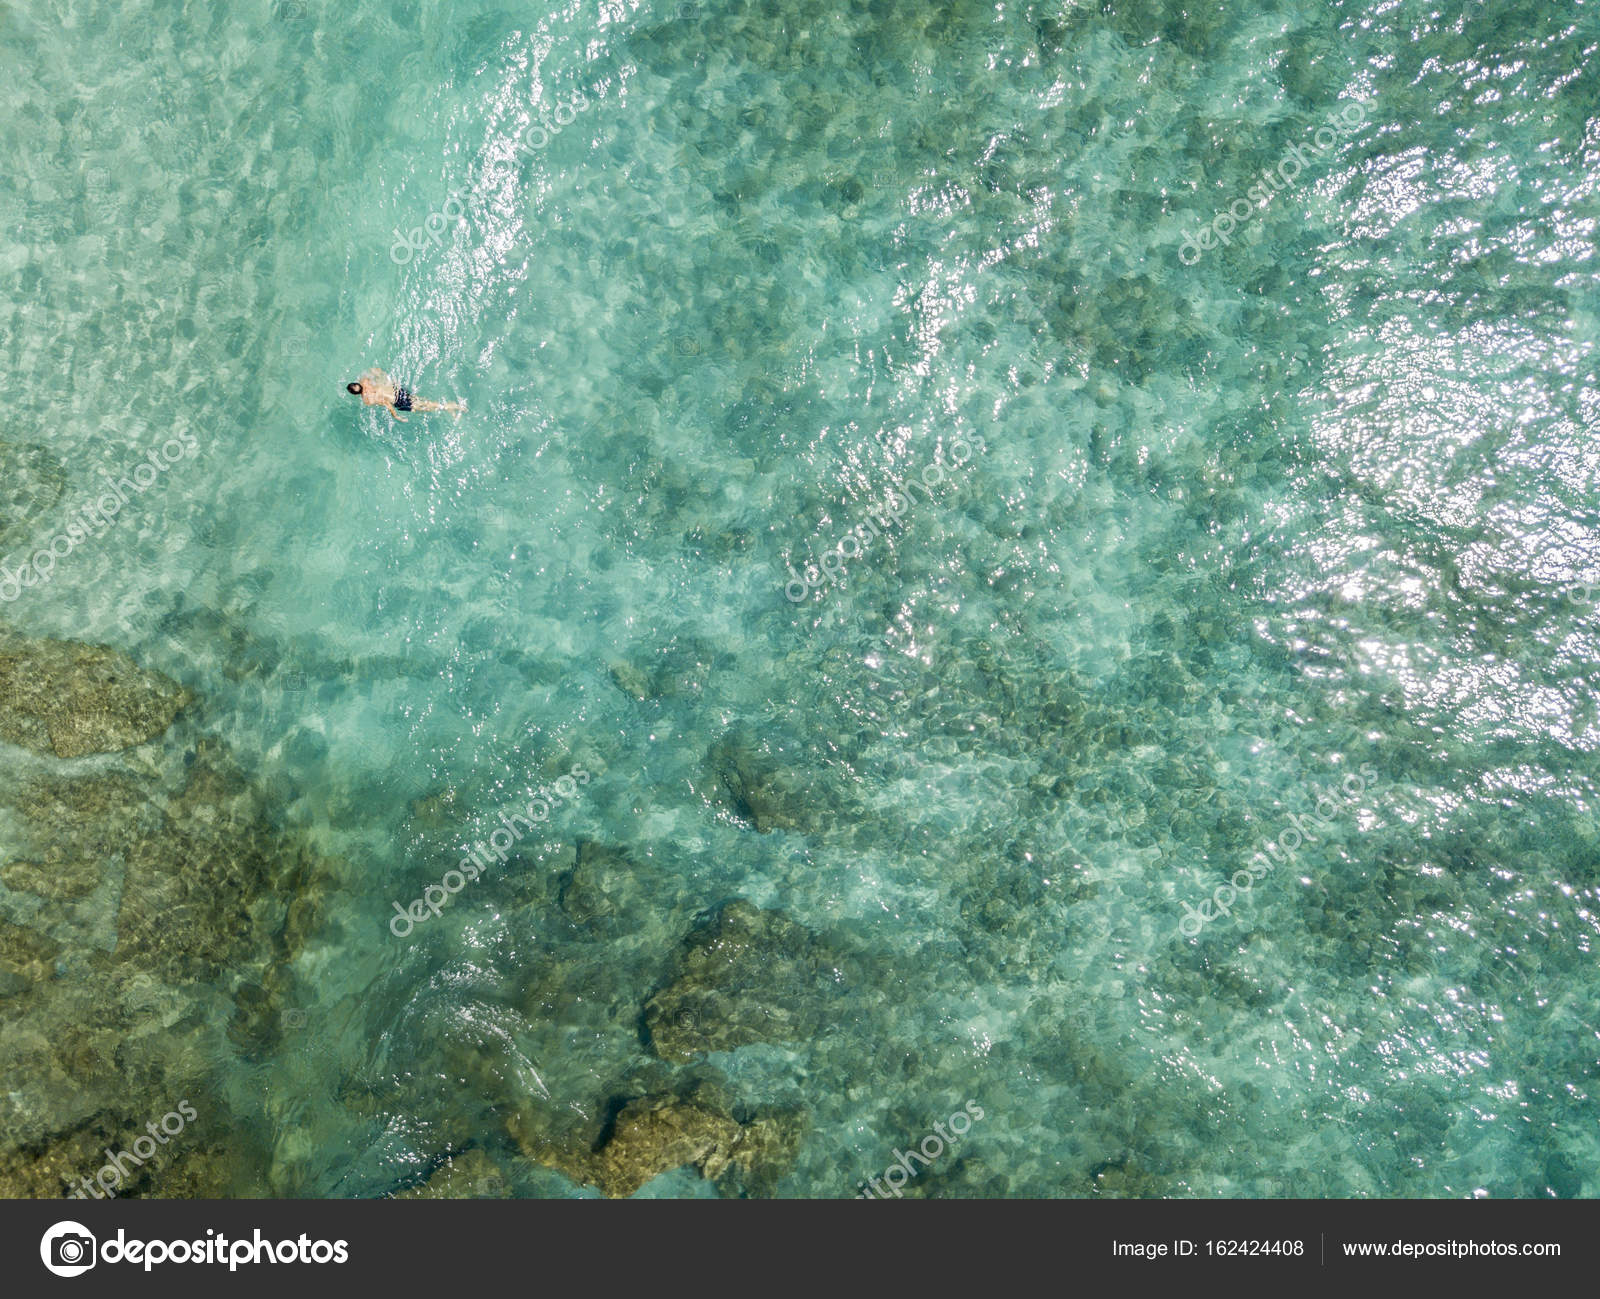 Aerial view of rocks on the sea. Overview of seabed seen from above ...